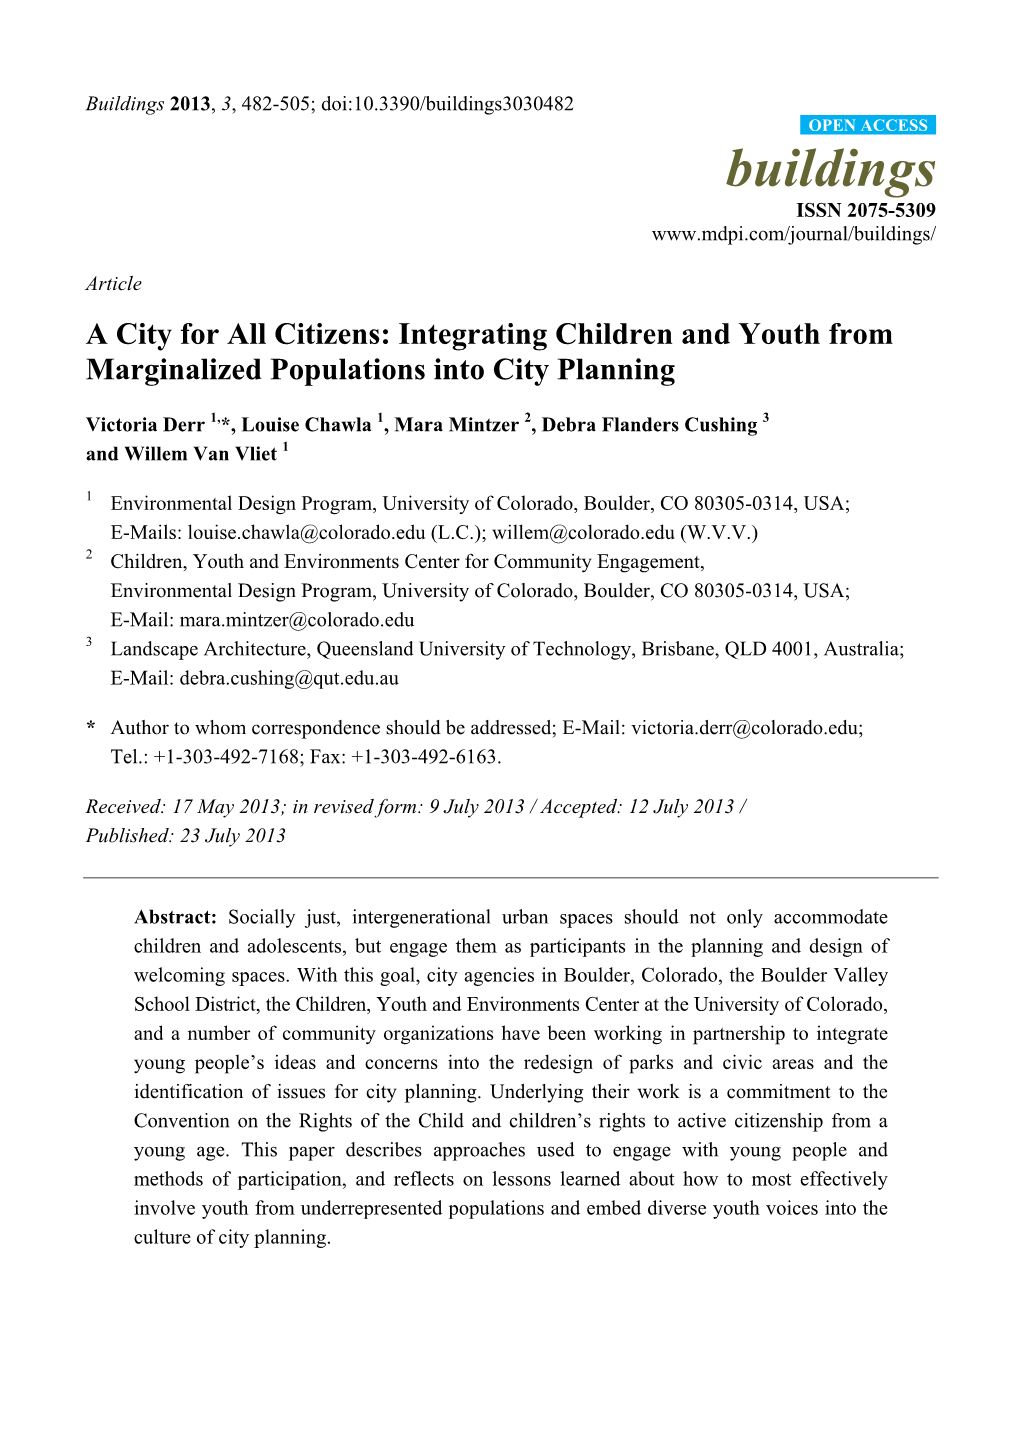 A City for All Citizens: Integrating Children and Youth from Marginalized Populations Into City Planning